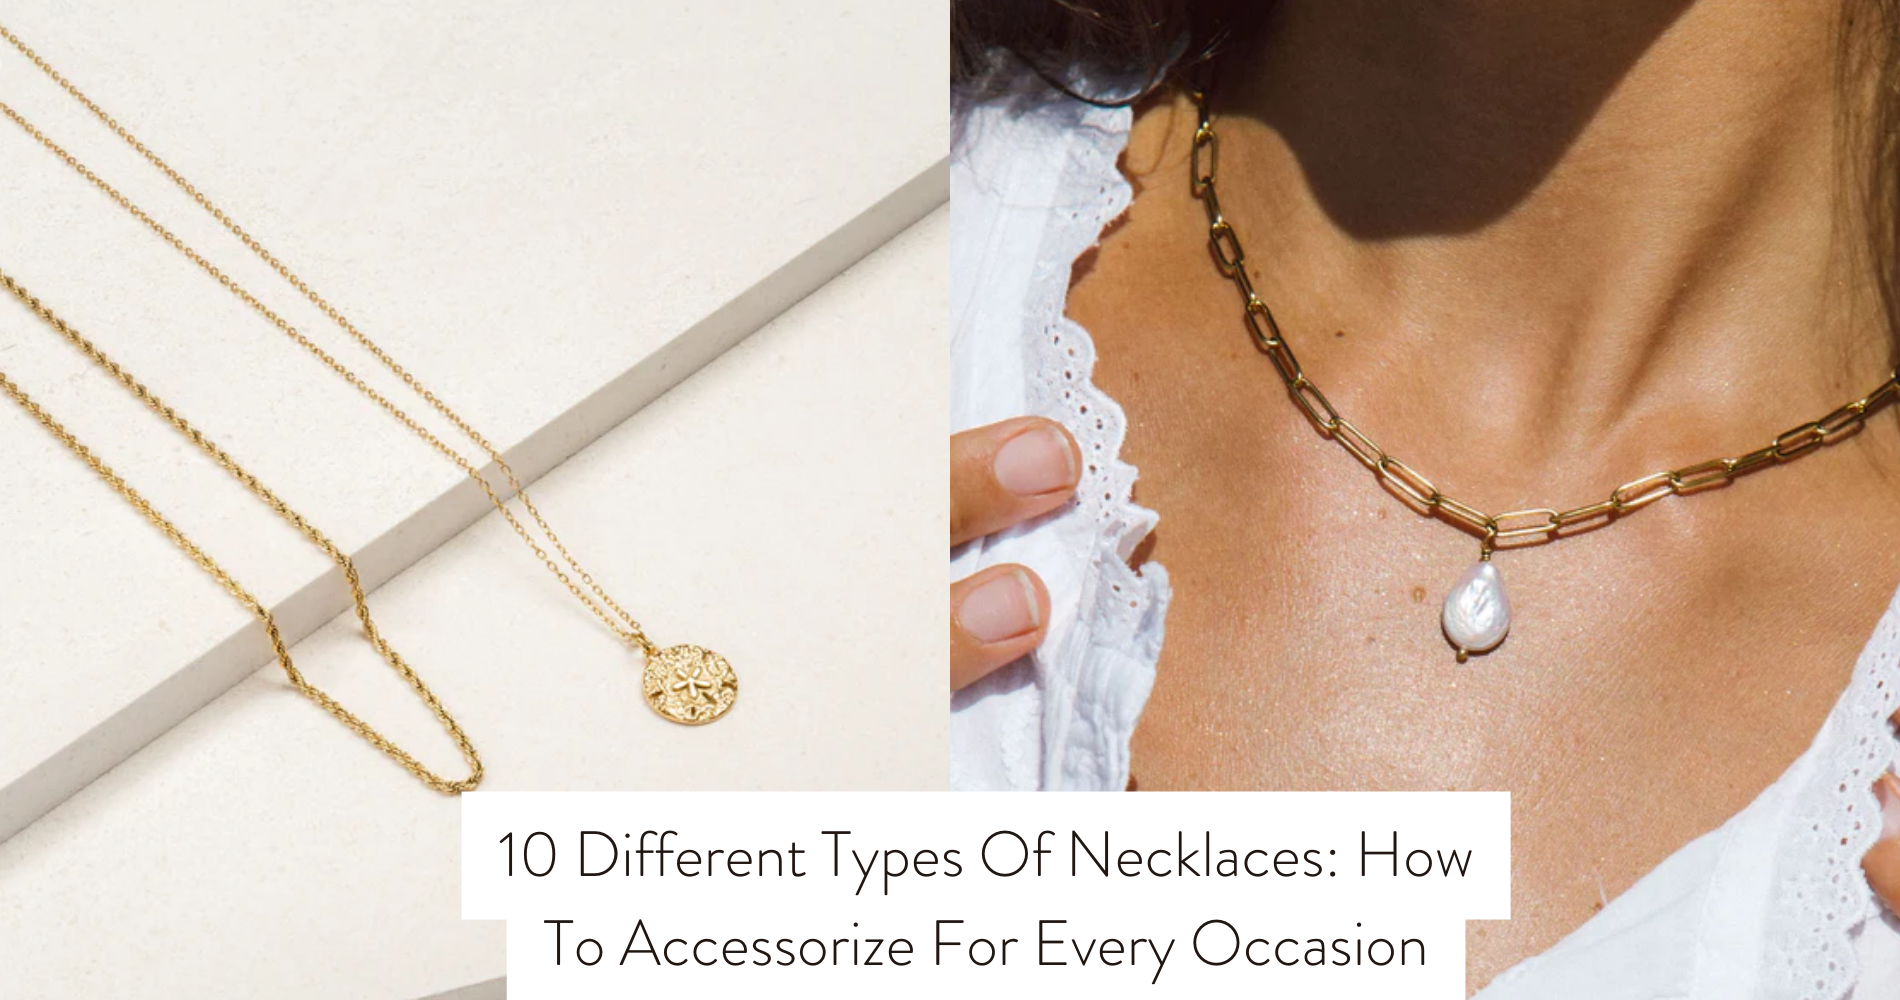 10 different types of necklaces